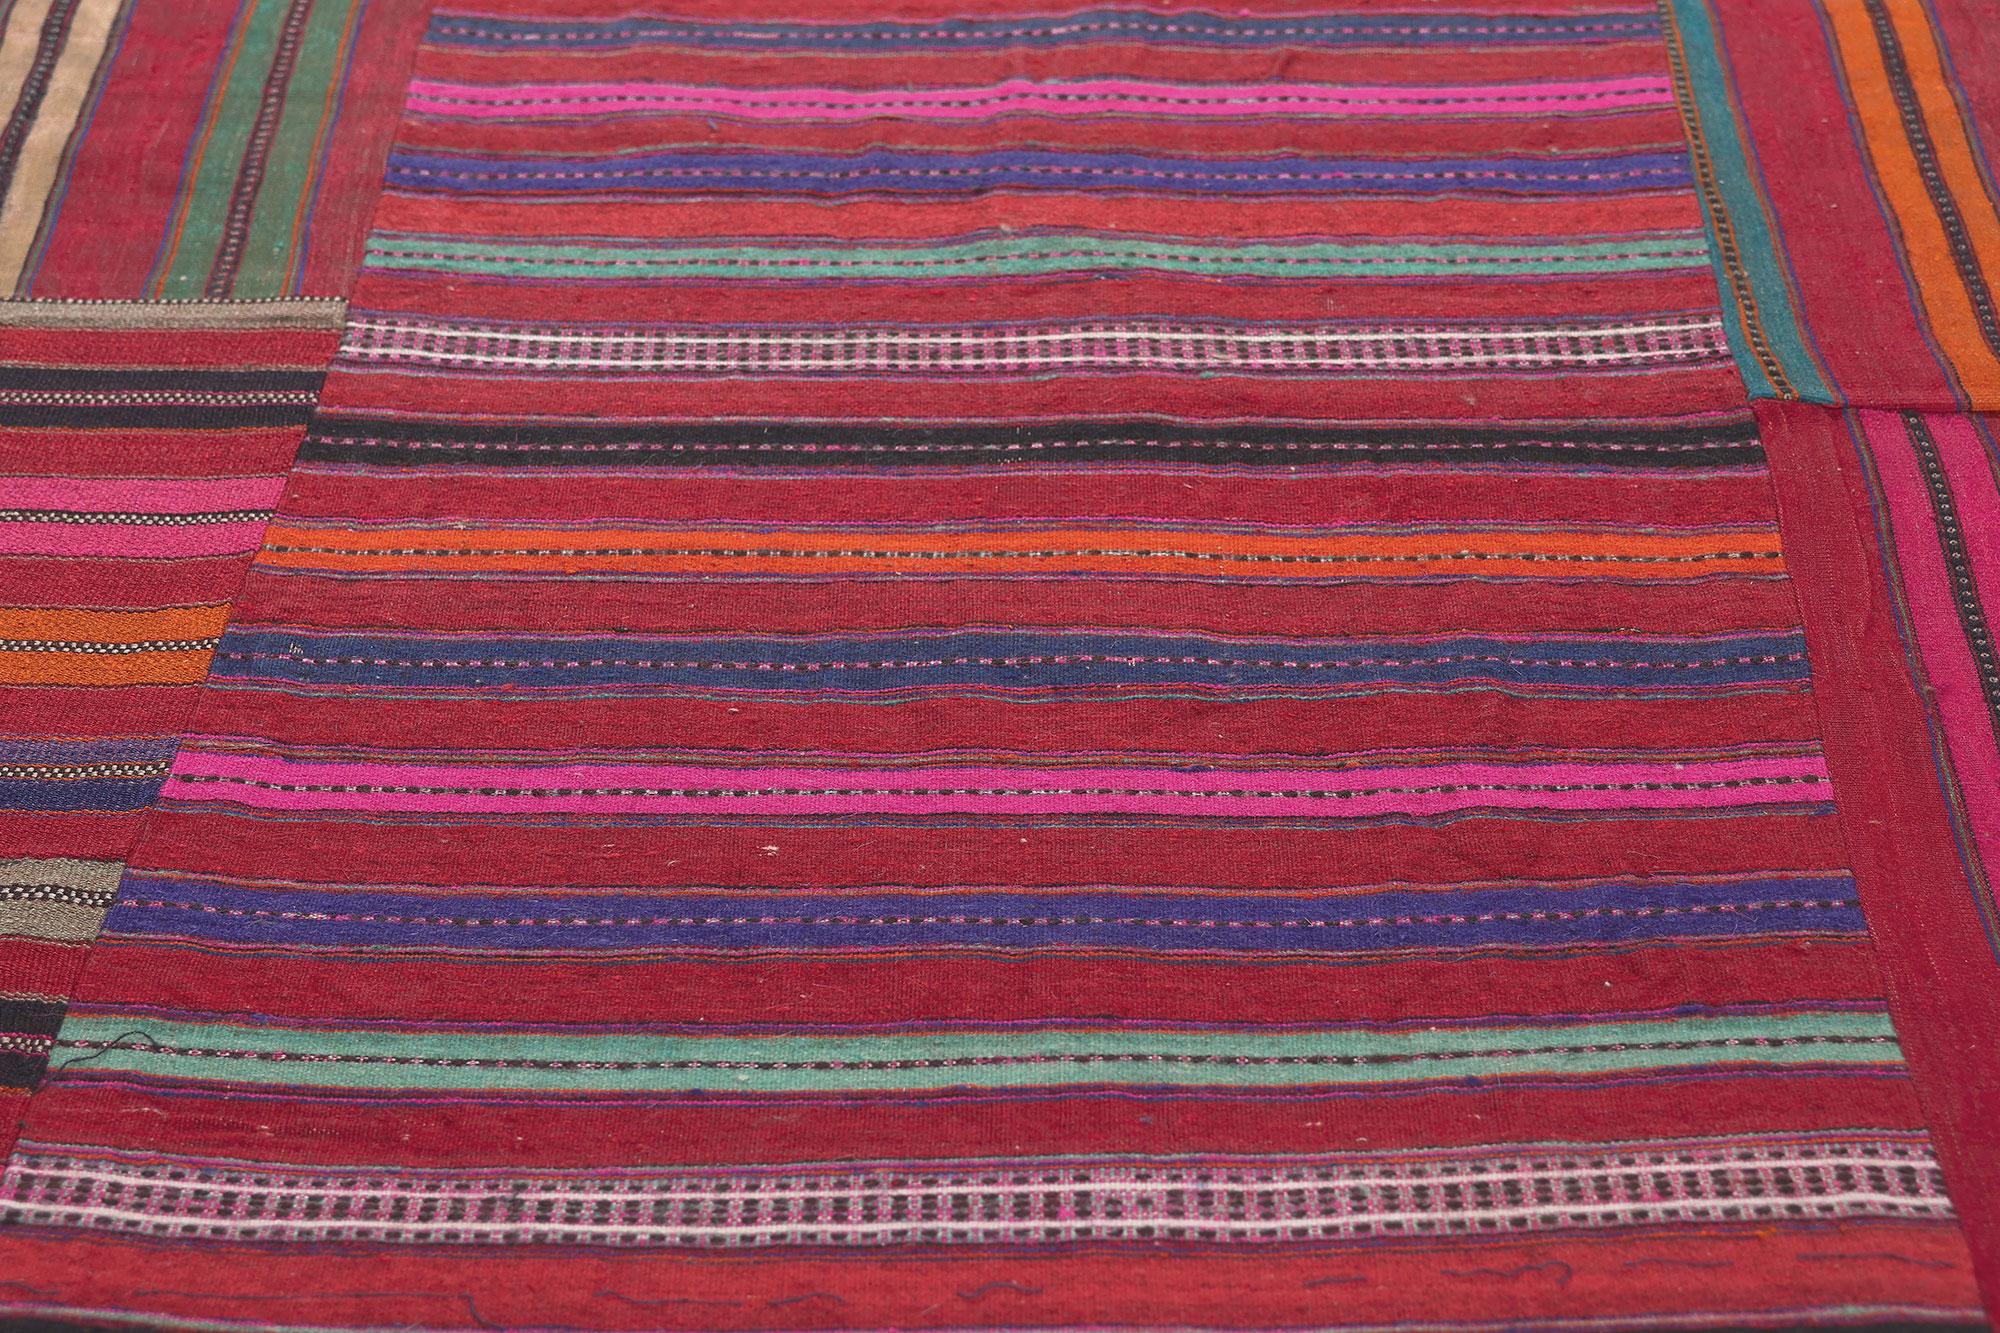 Vintage Turkish Kilim Rug with Striped Colorblock Pattern In Distressed Condition For Sale In Dallas, TX